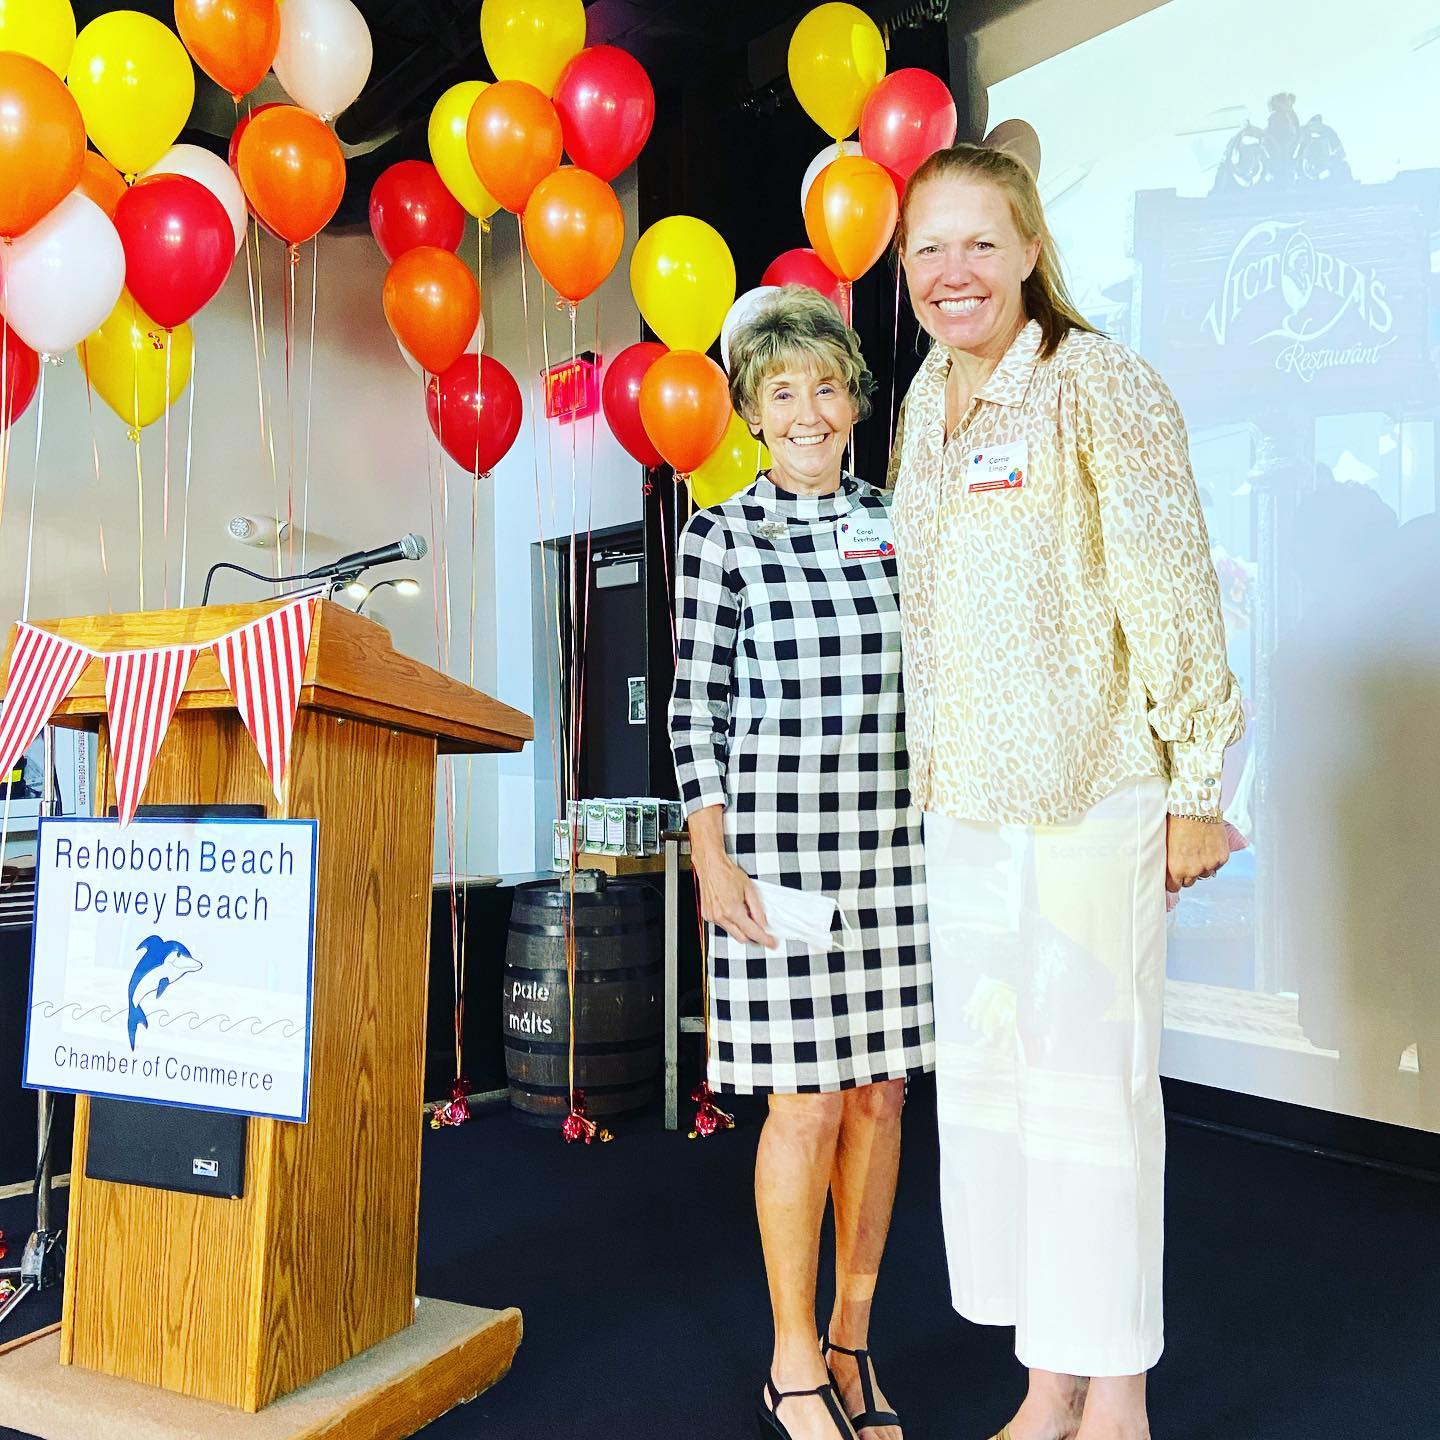 carrie_and_carol Jack Lingo, REALTOR® ATTENDS 2021 REHOBOTH BEACH-DEWEY BEACH CHAMBER OF COMMERCE INAUGURAL AWARDS LUNCHEON! - Jack Lingo REALTOR